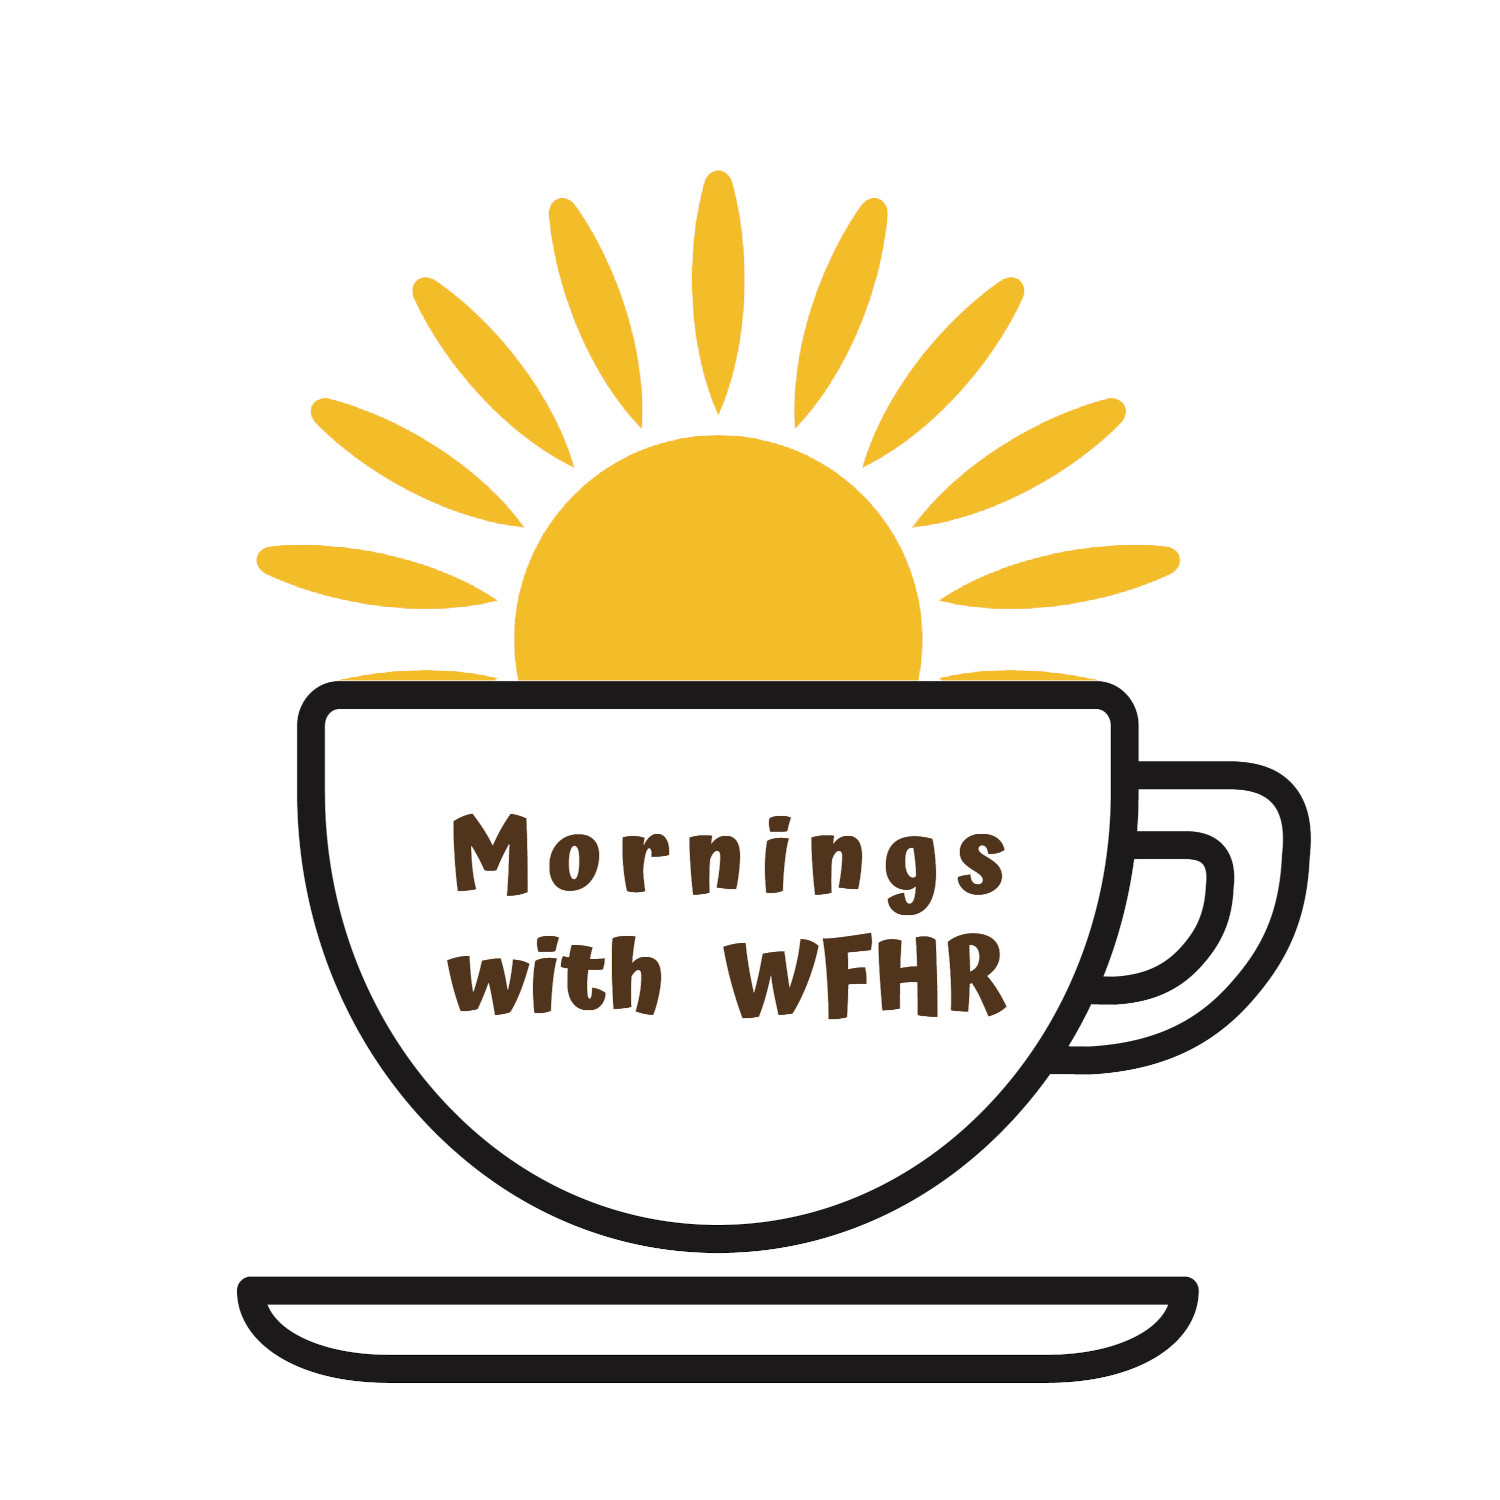 Mornings with WFHR logo